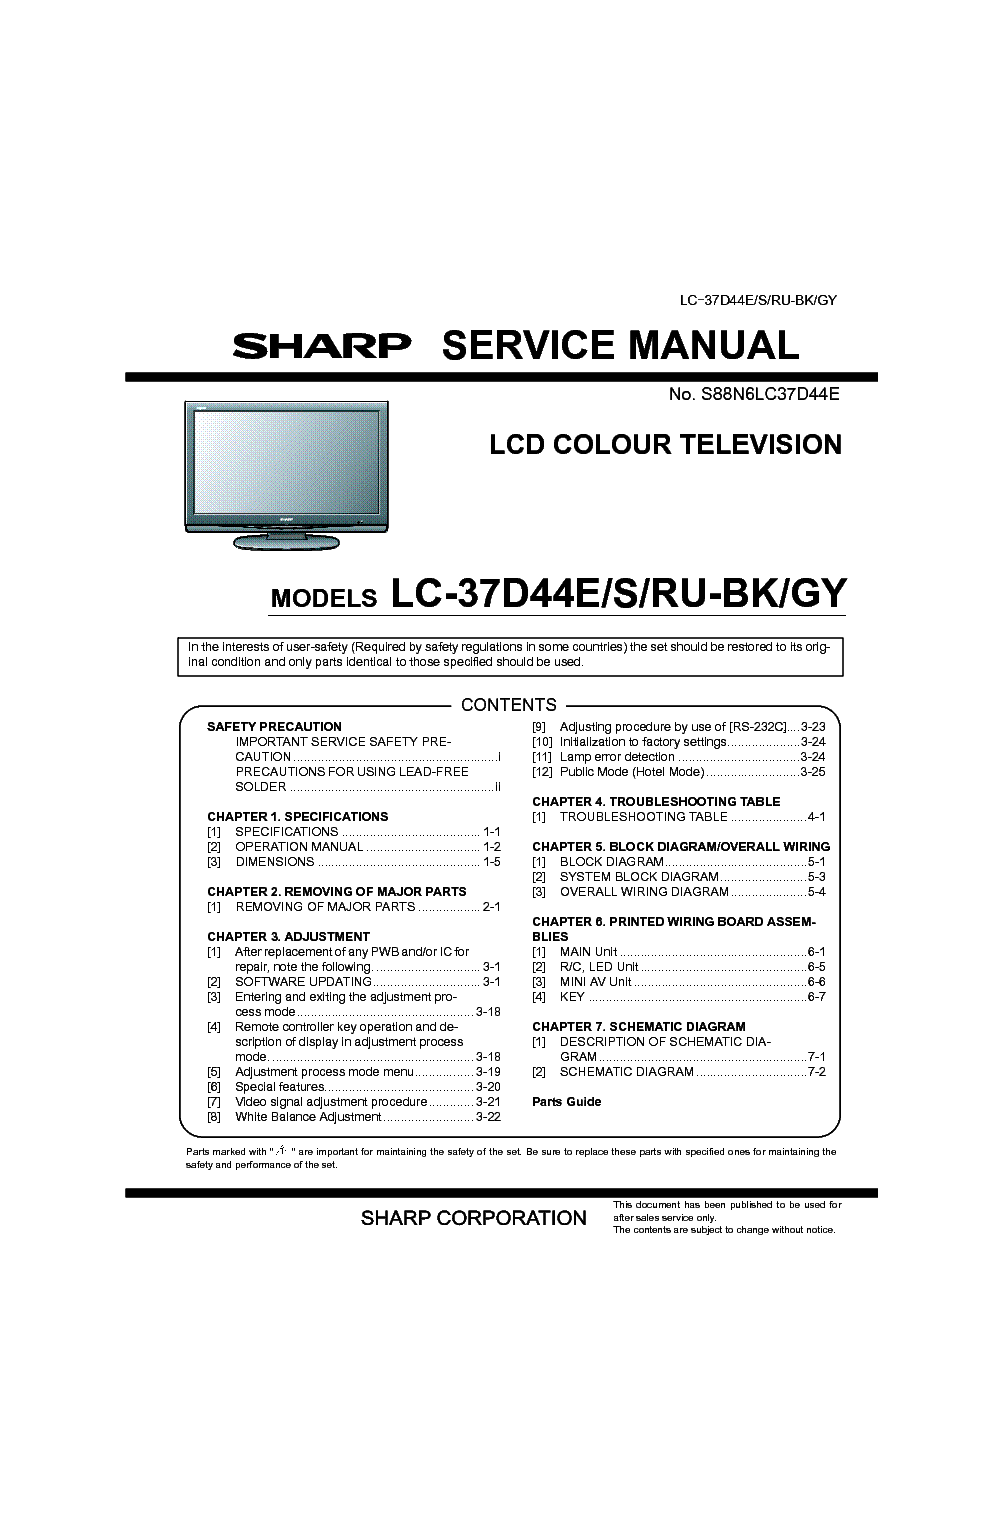 SHARP LC-37D44E S RU-BK GY service manual (1st page)